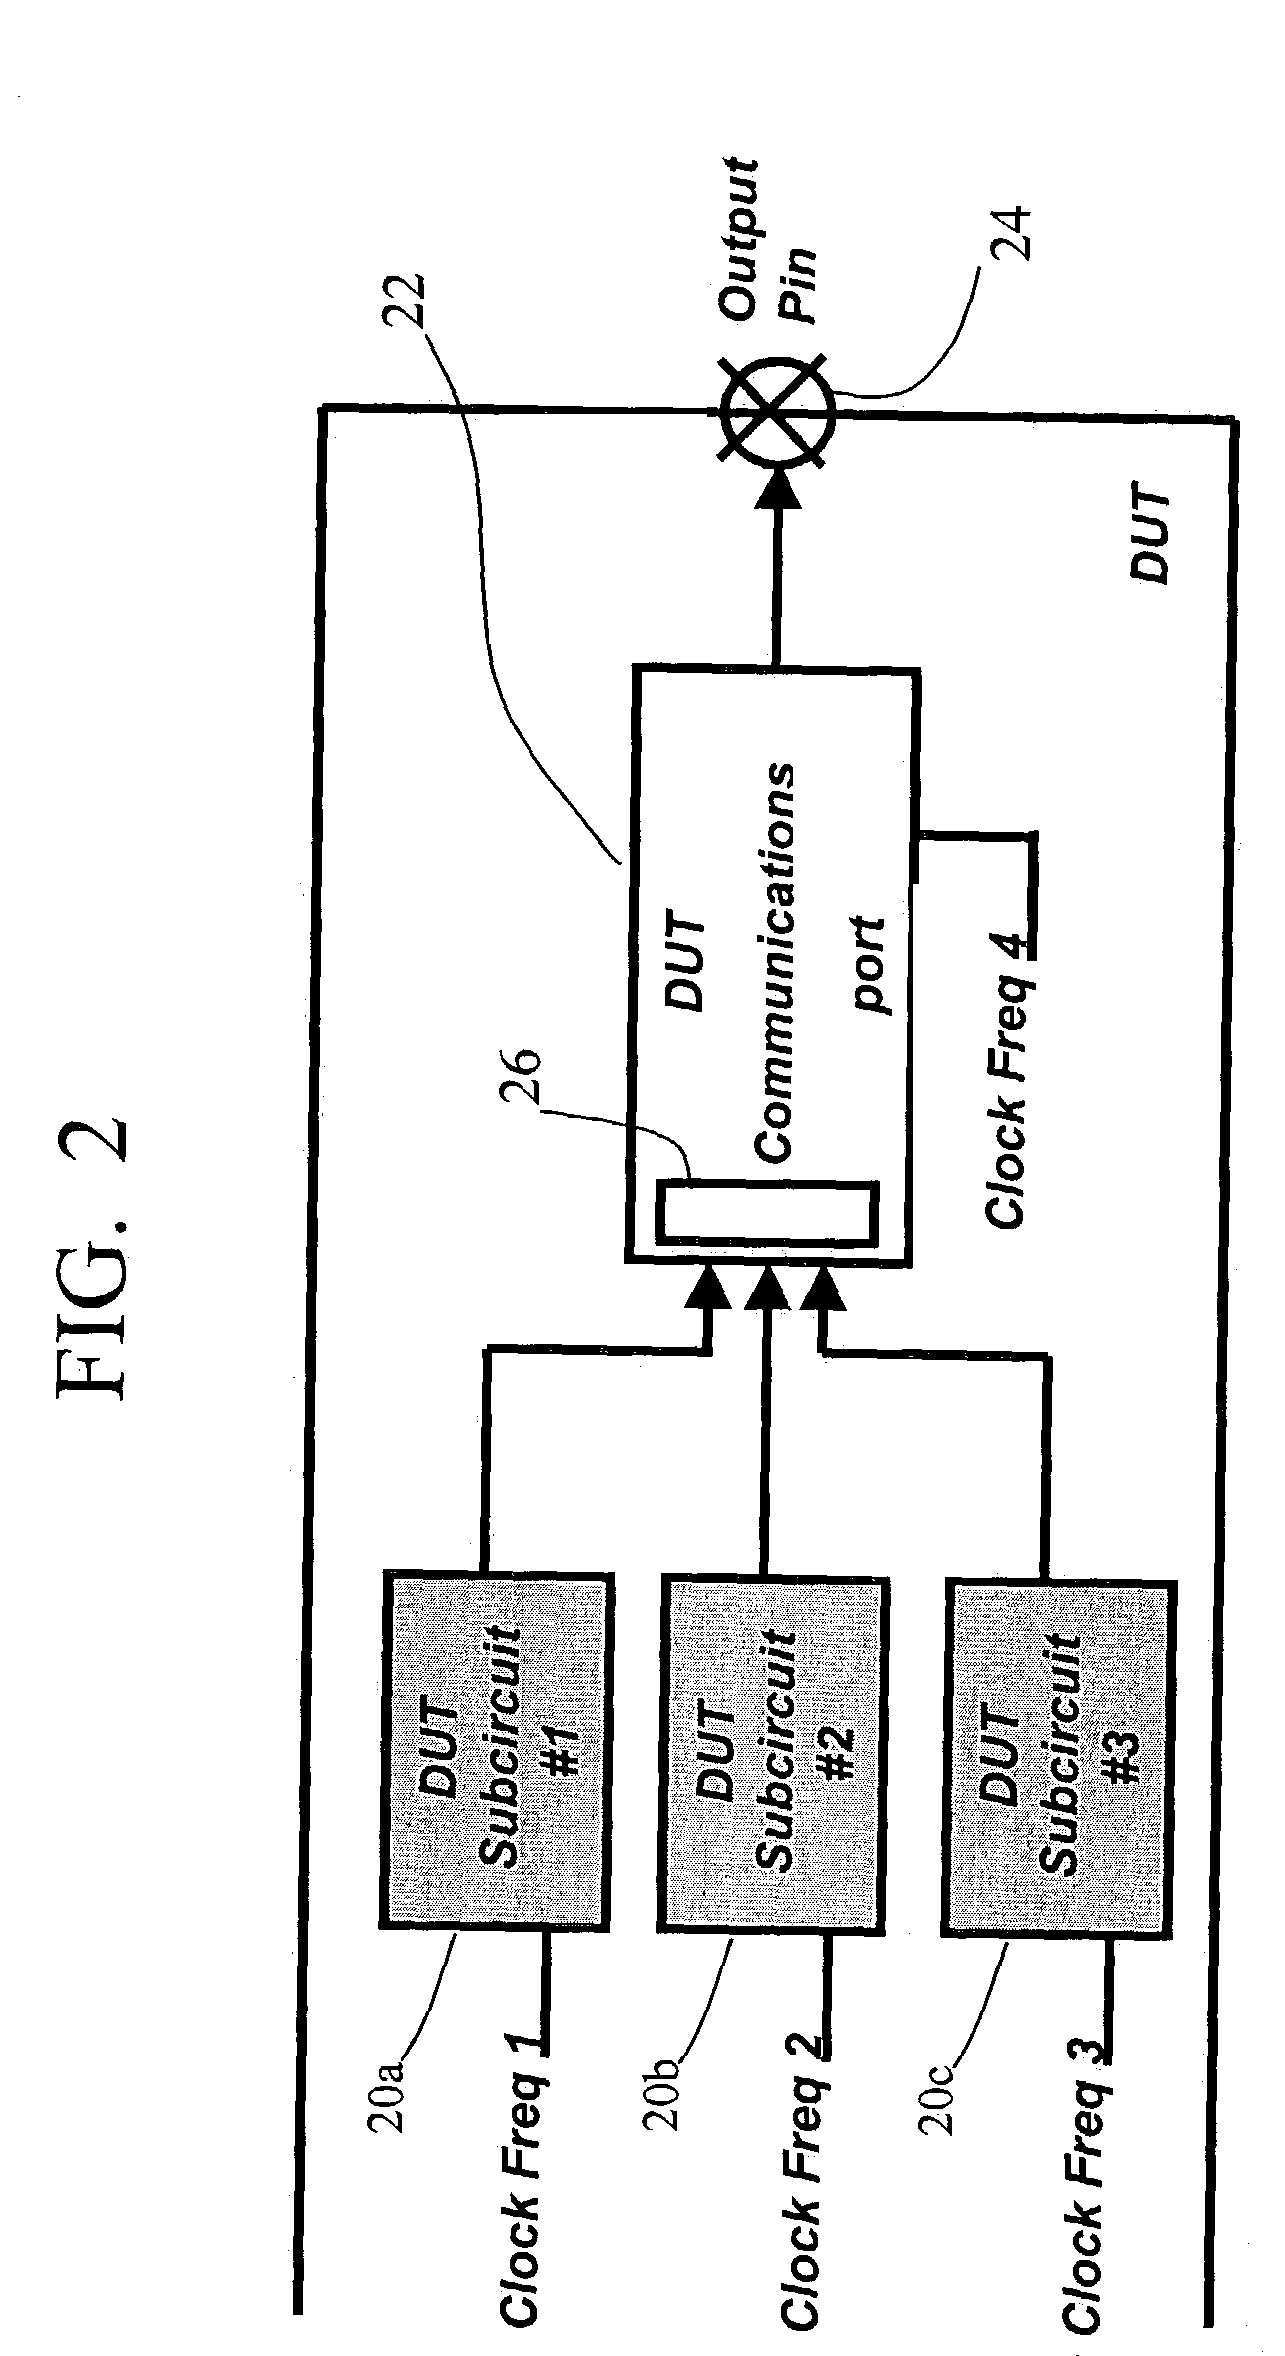 Apparatus and method for testing non-deterministic device data